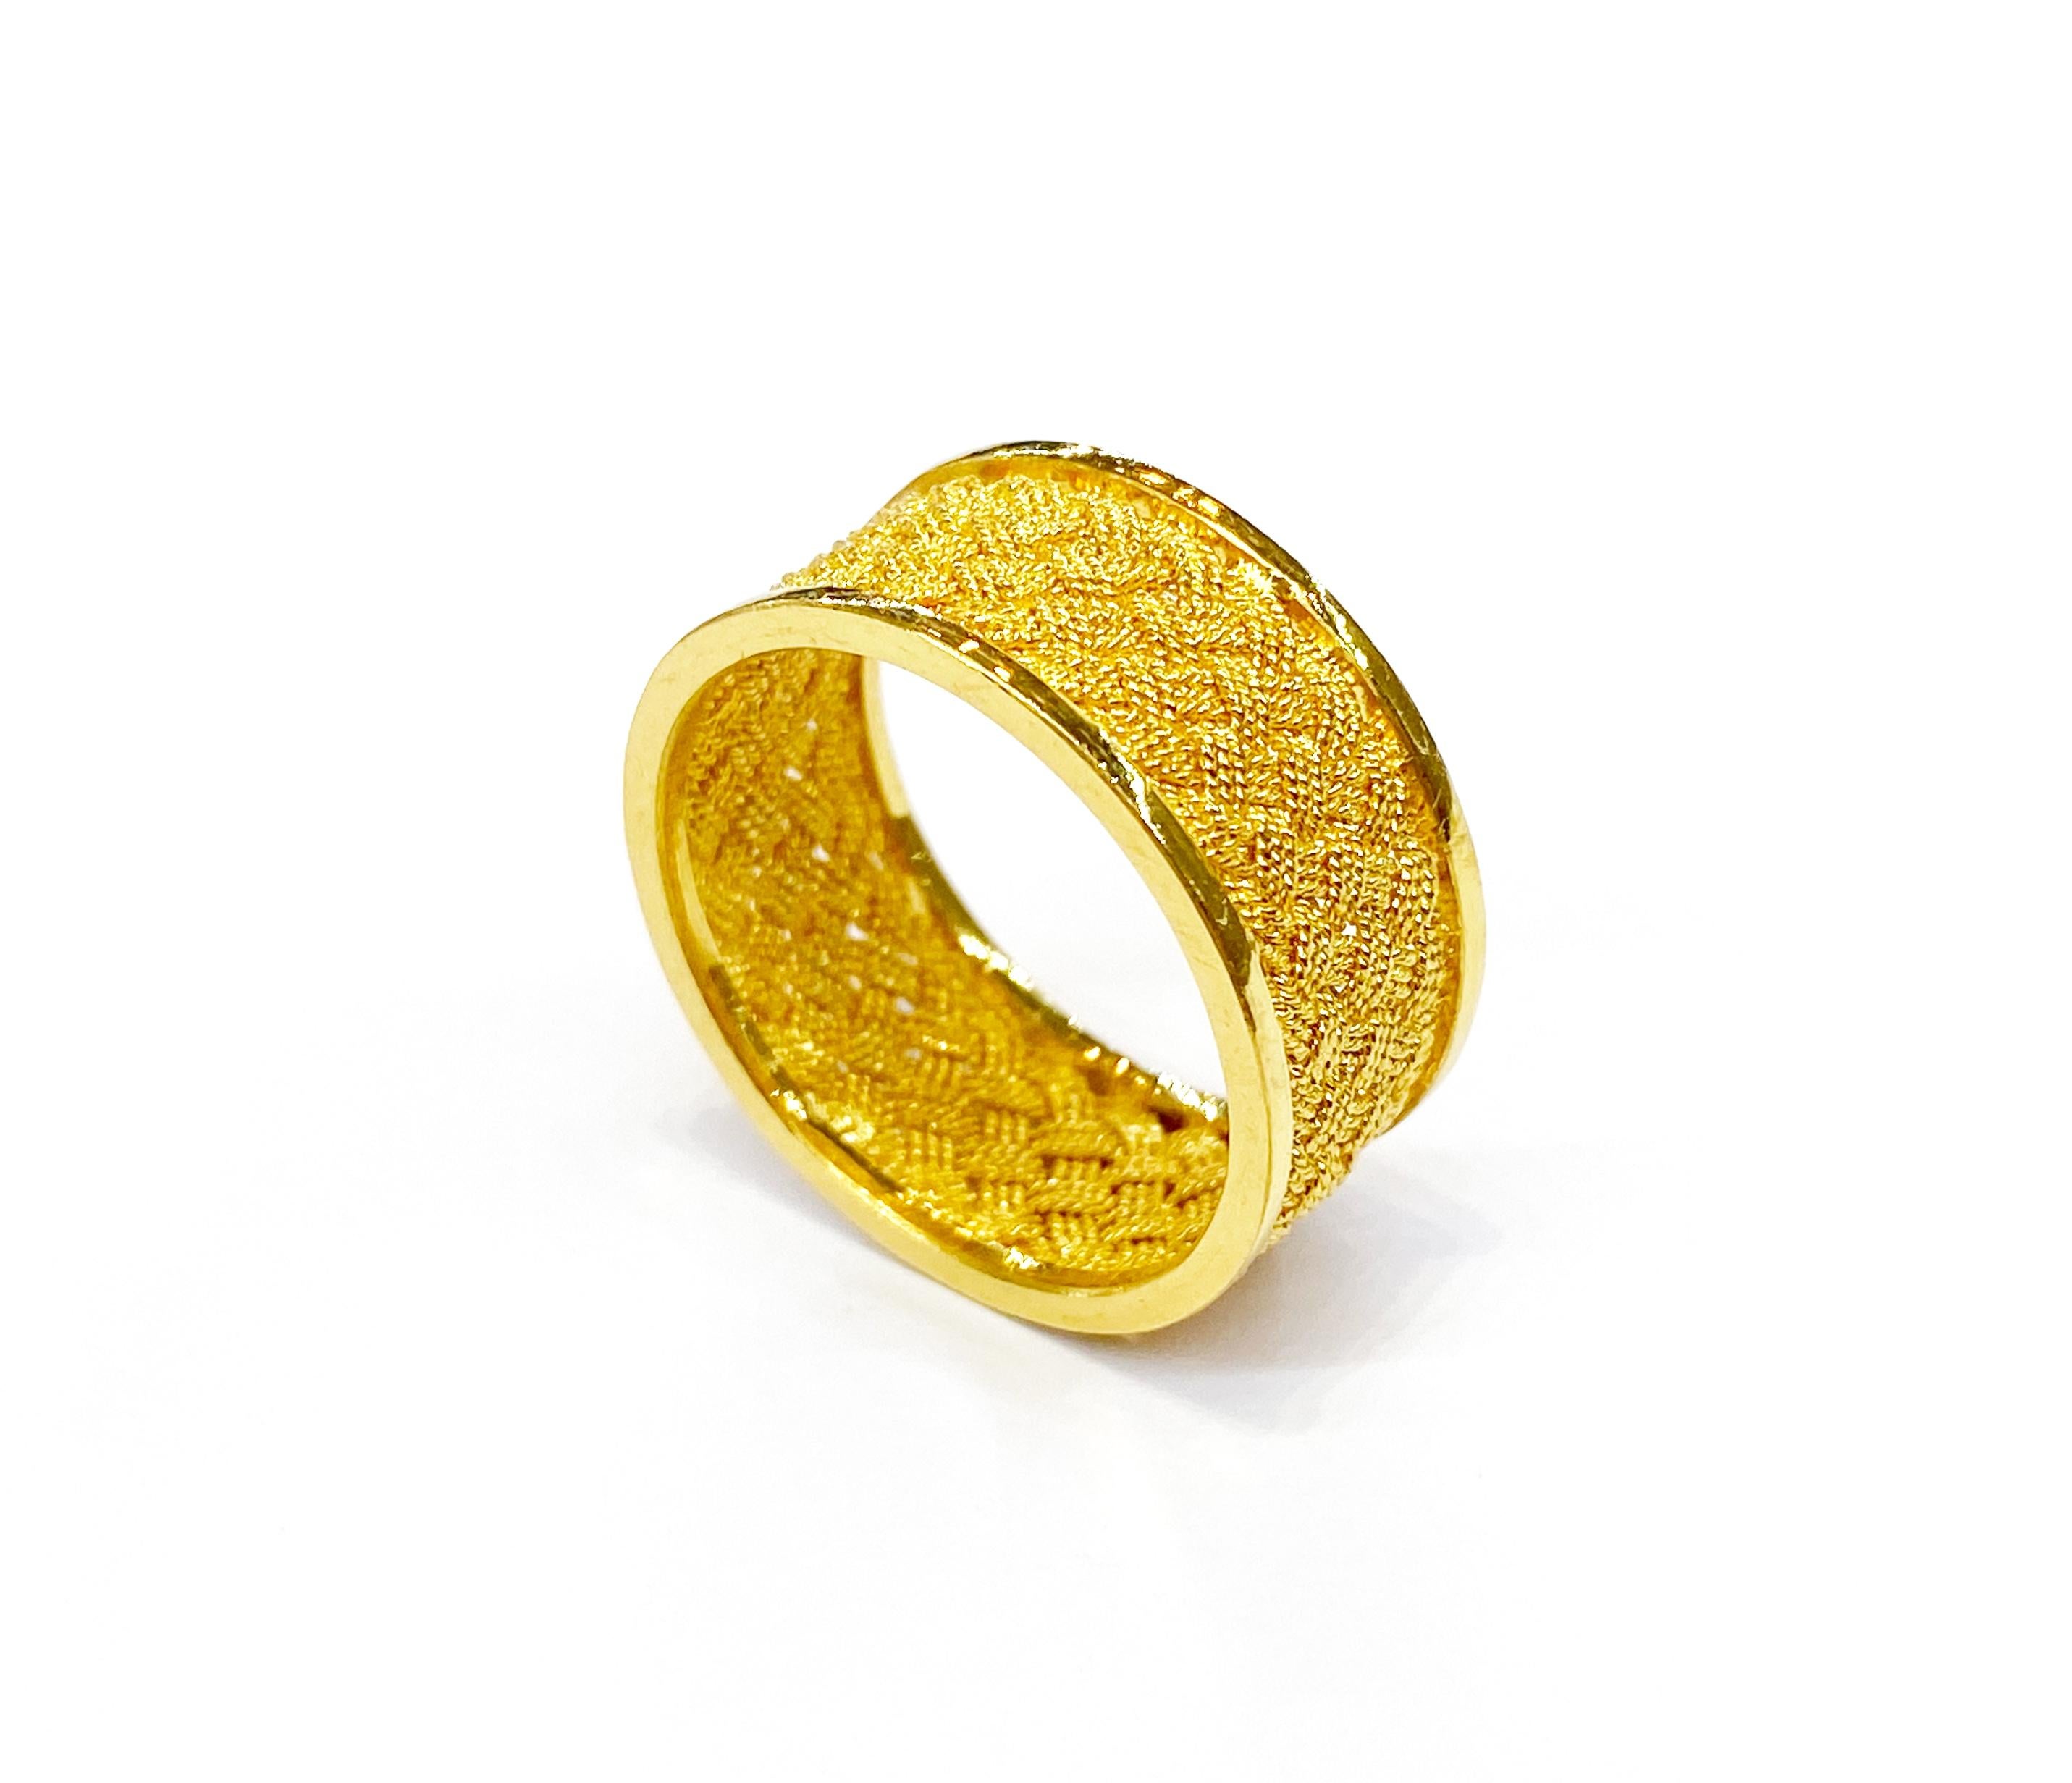 A beautiful and stylish ring, handmade of  22 Karat gold filigree which can be worn for any occasion.
O’Che 1867 was founded one and a half centuries ago in Macau. The brand is renowned for its high jewellery collections with fabulous designs. Our